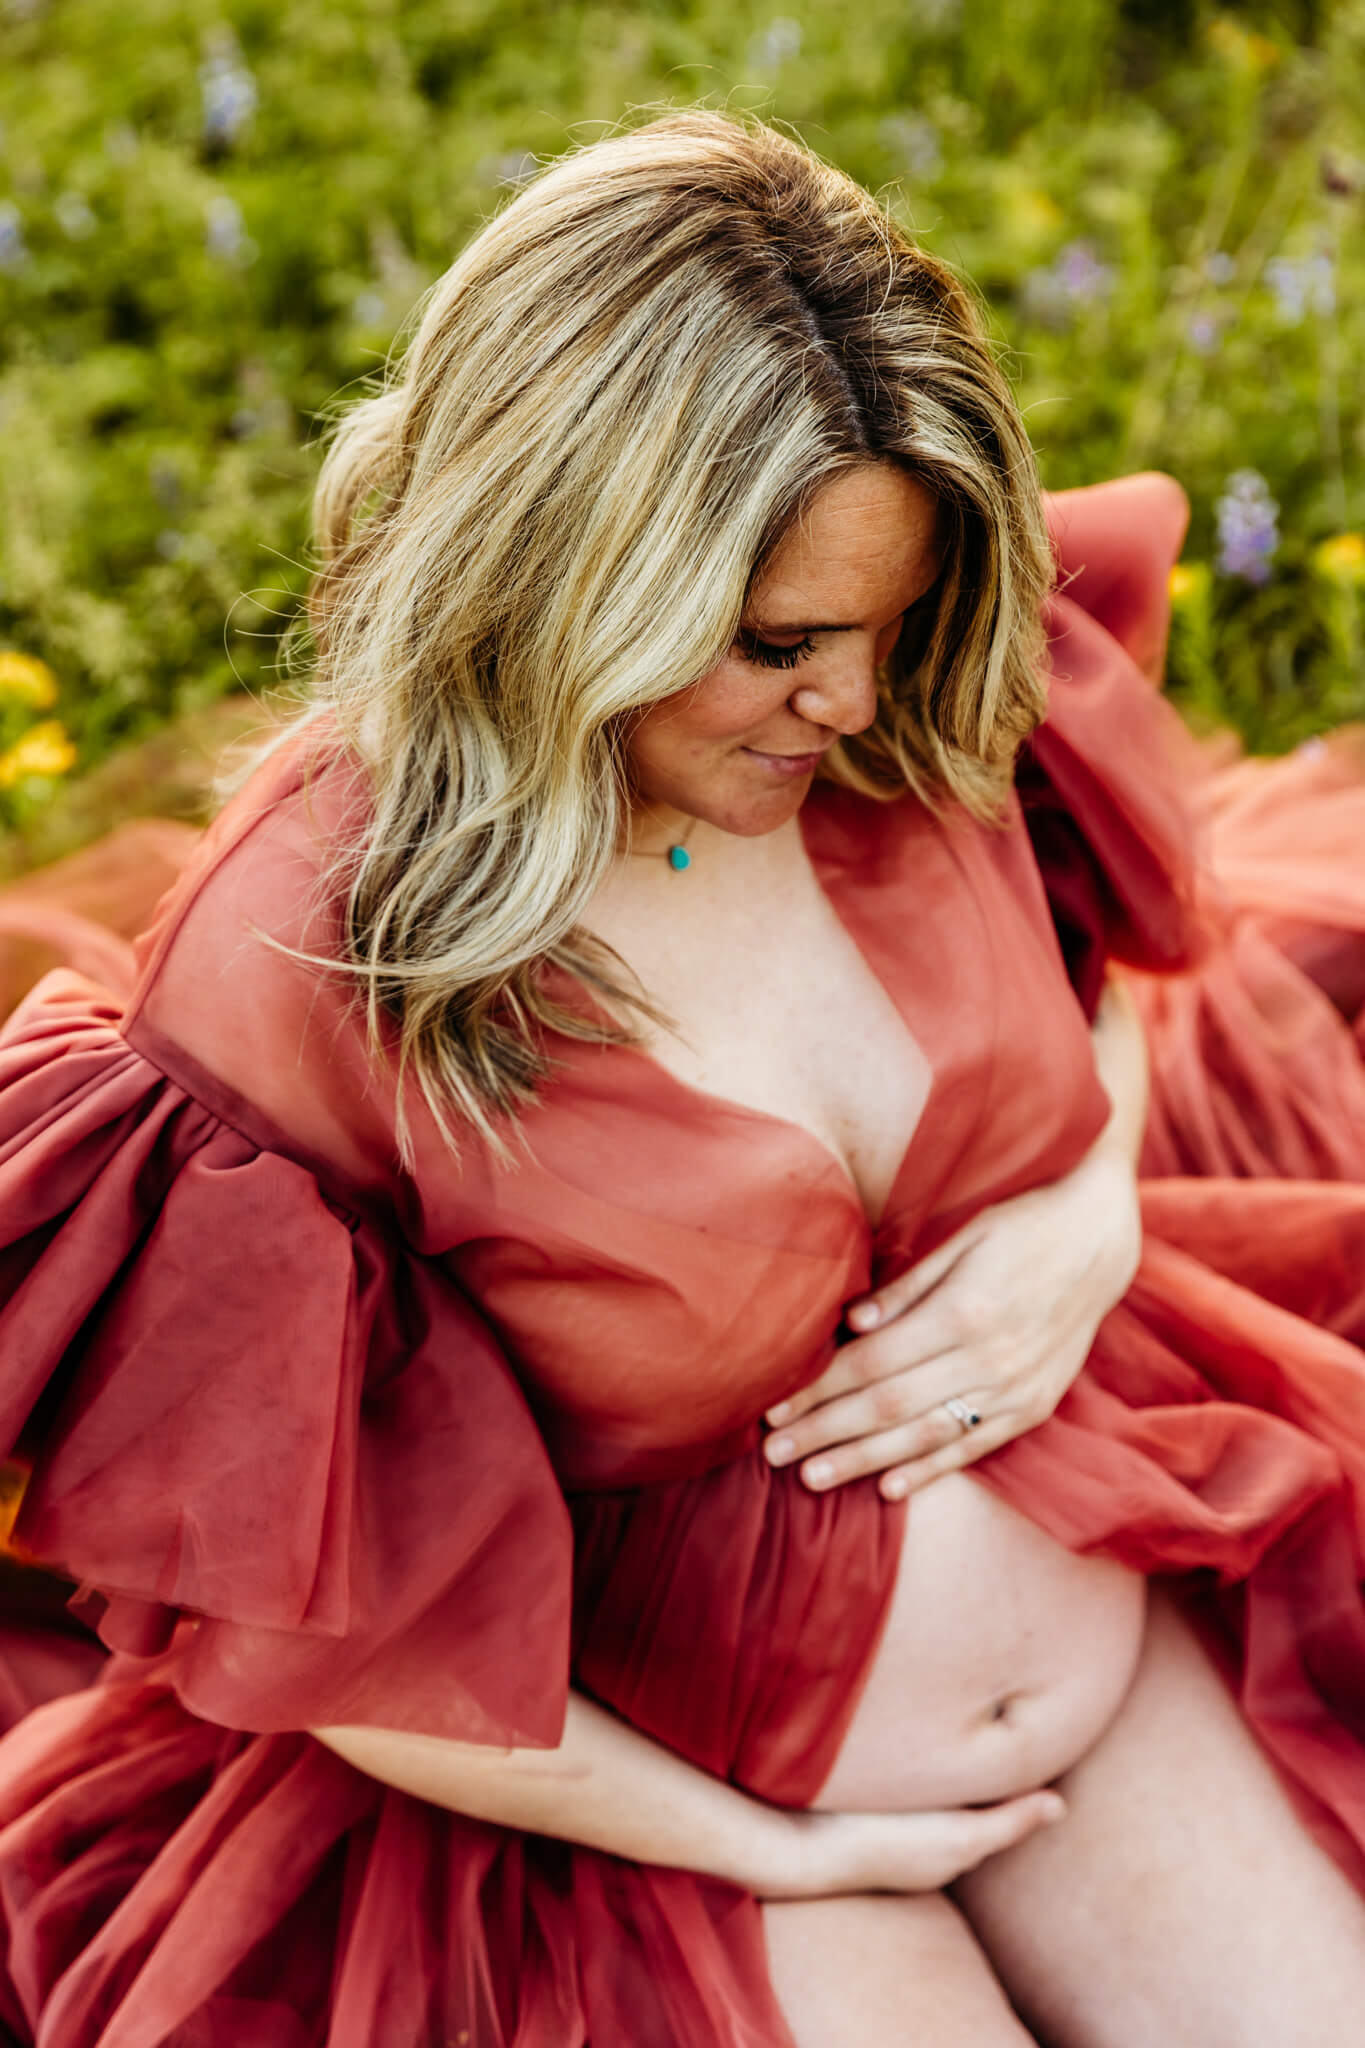 expecting mama kneeling in a flower field in a flowy robe and holding her bare baby bump while looking down